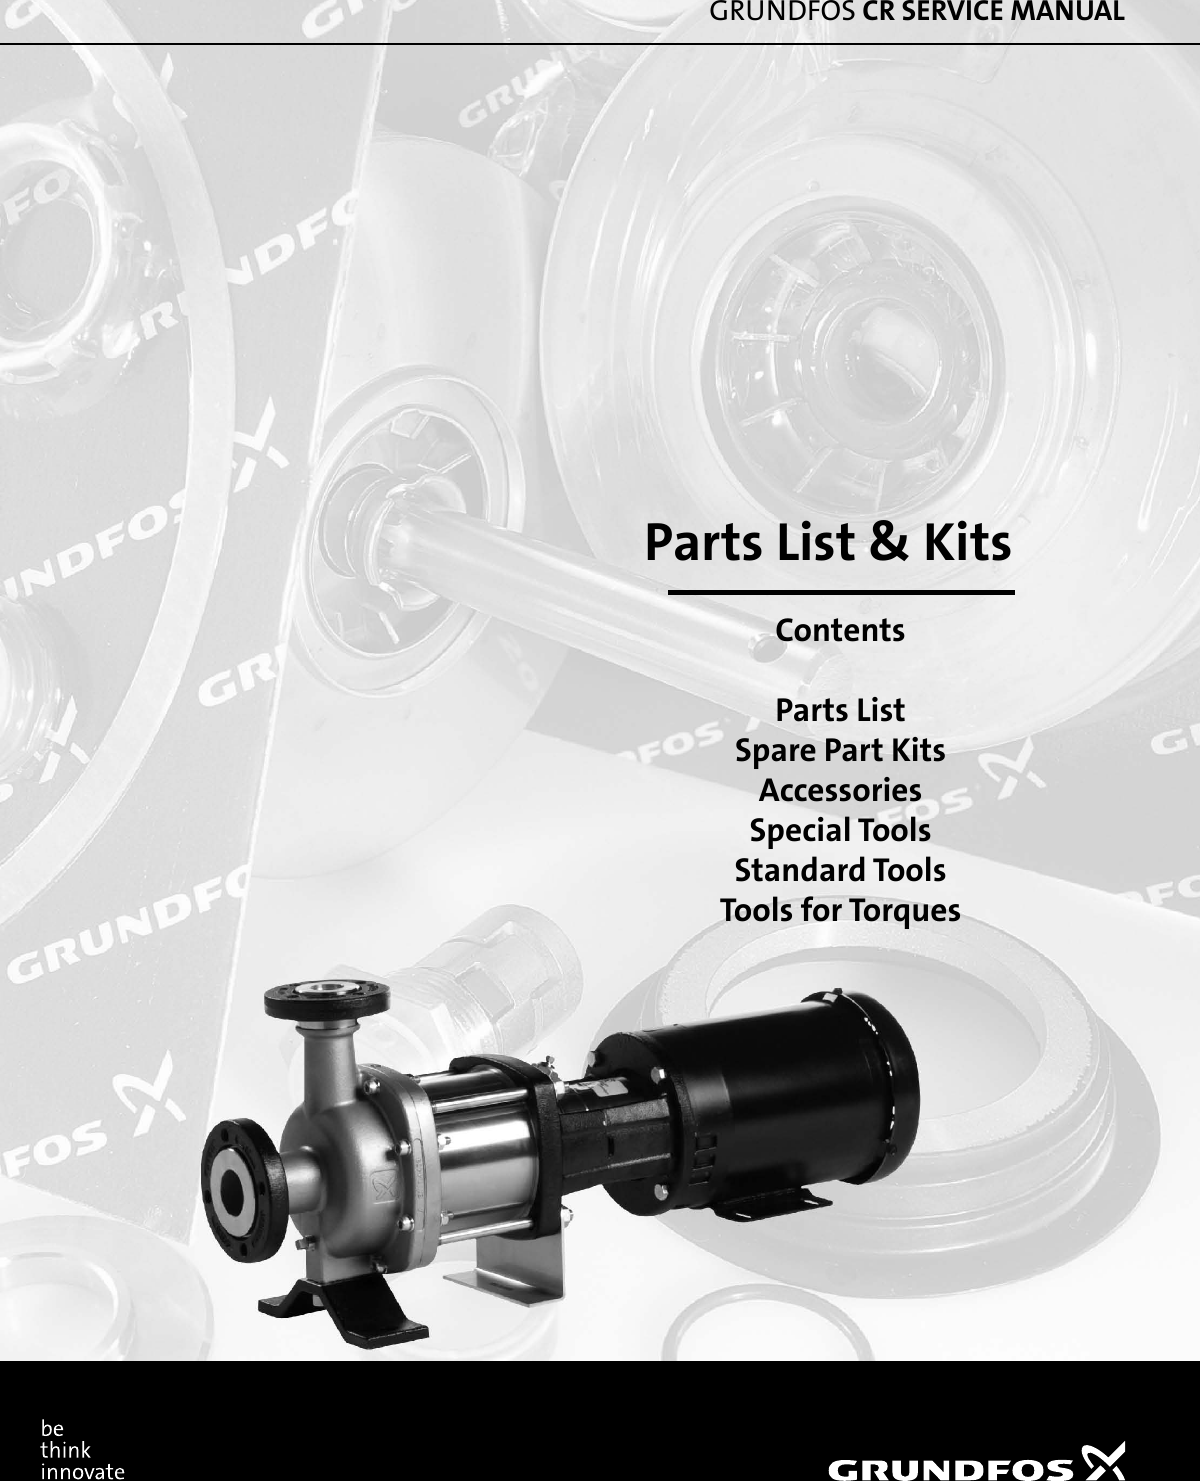 Page 1 of 12 - 548293 1 Grundfos CR Replacement Parts List